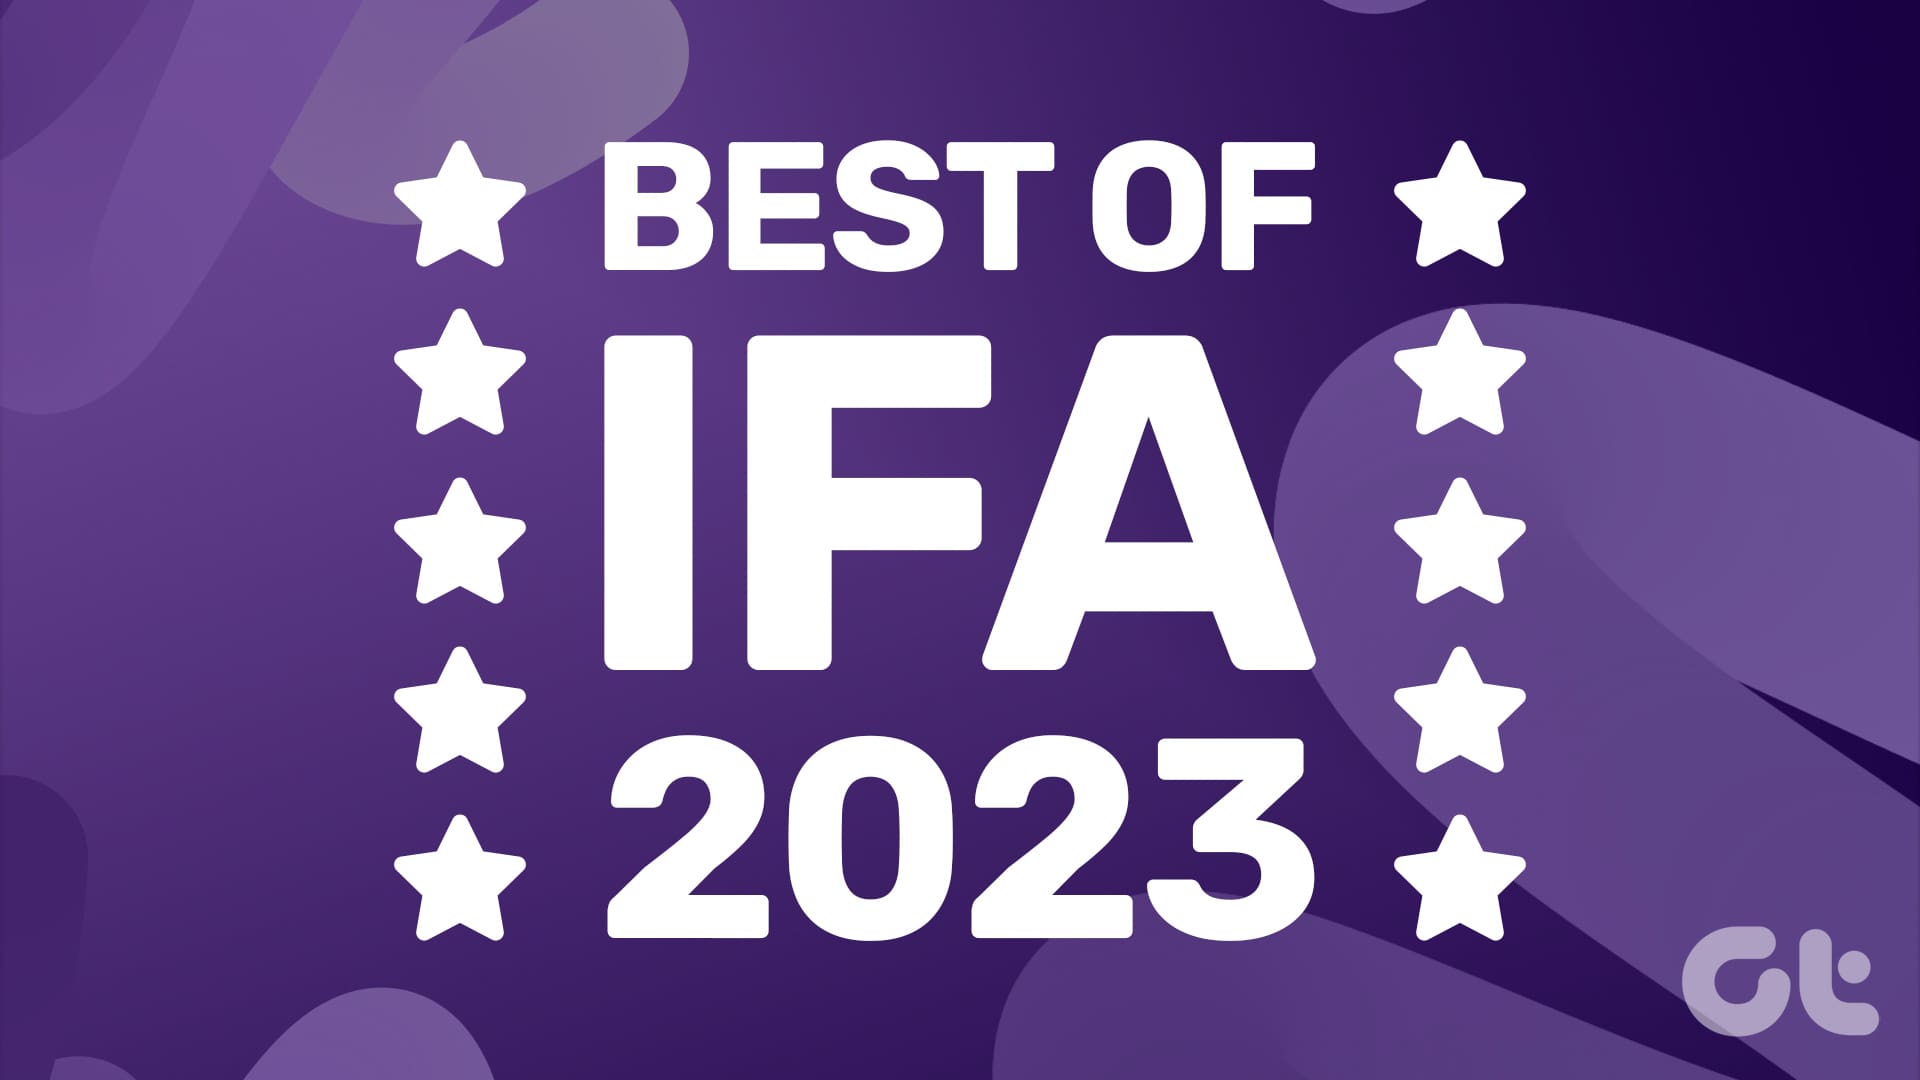 You are currently viewing IFA 2023 요약: IFA 2023 베스트